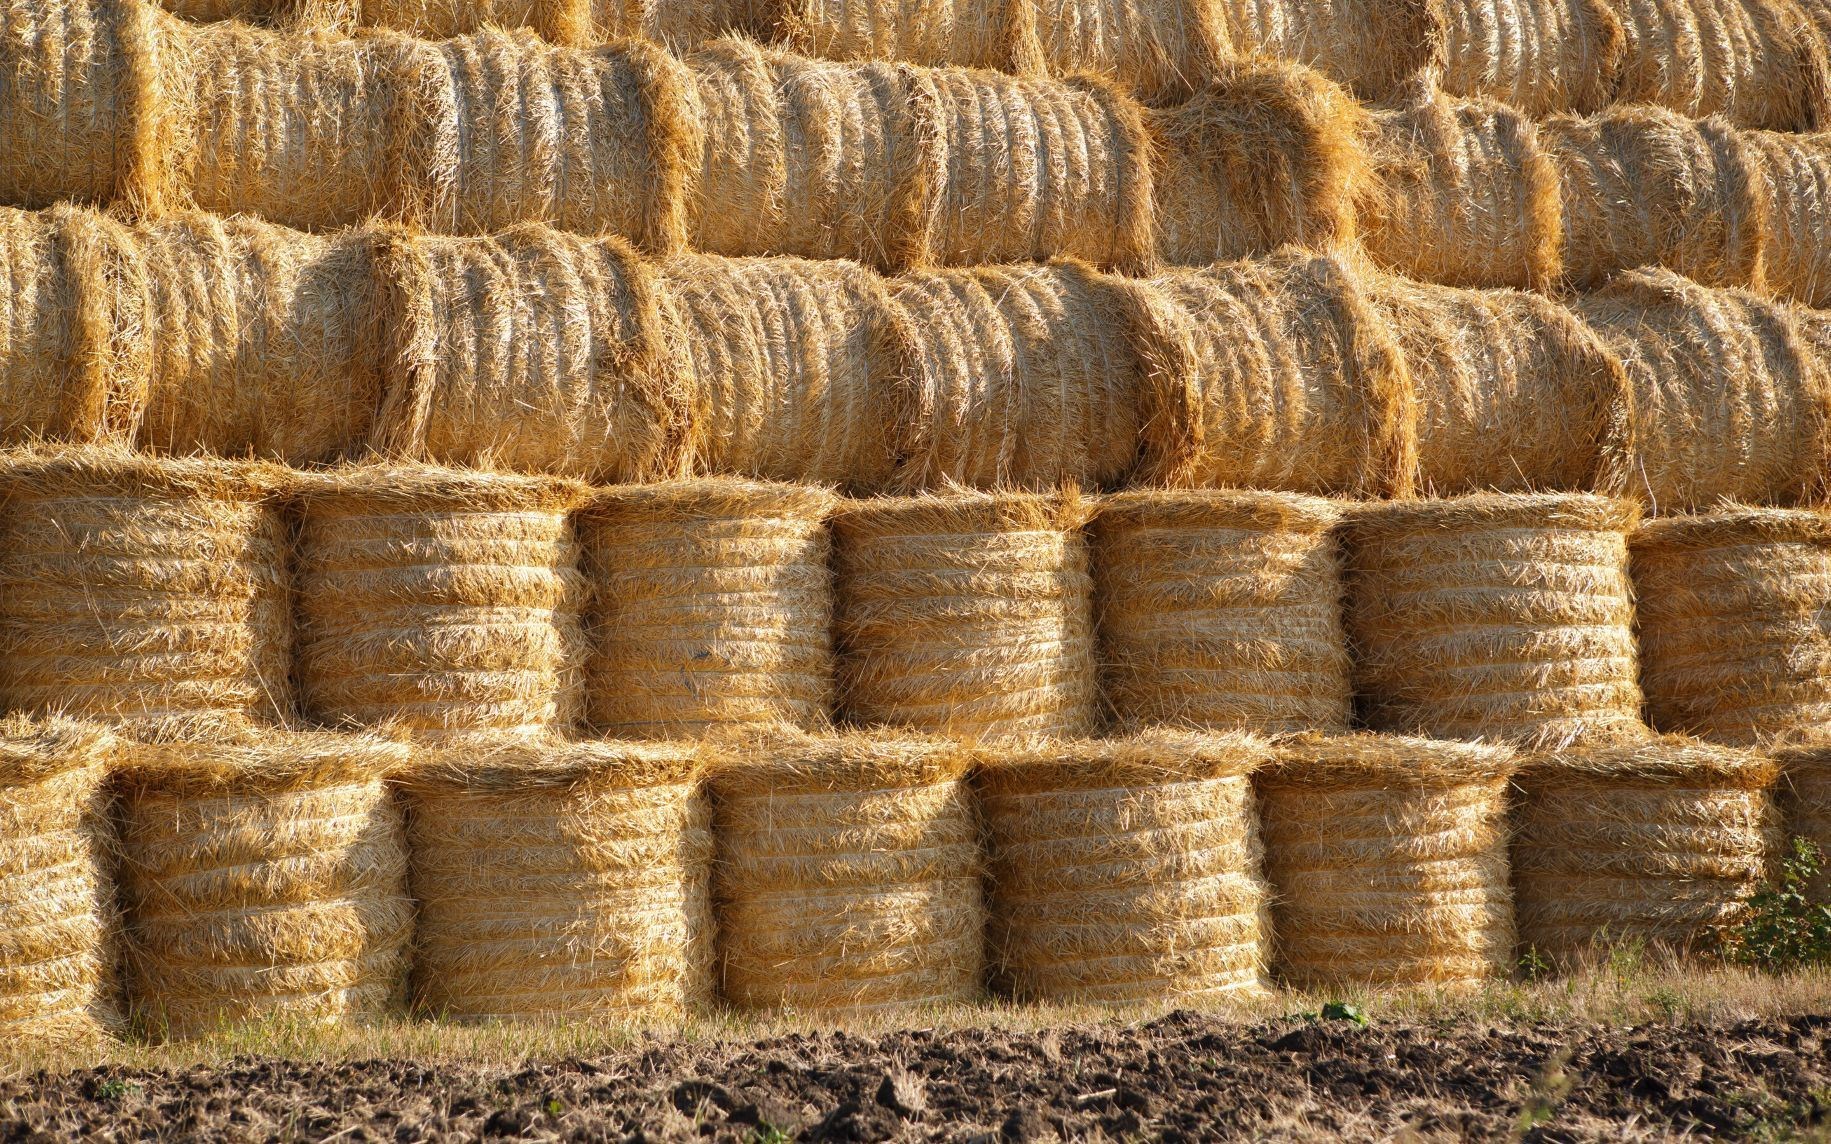 Farmers are being warned about hay stack limits.